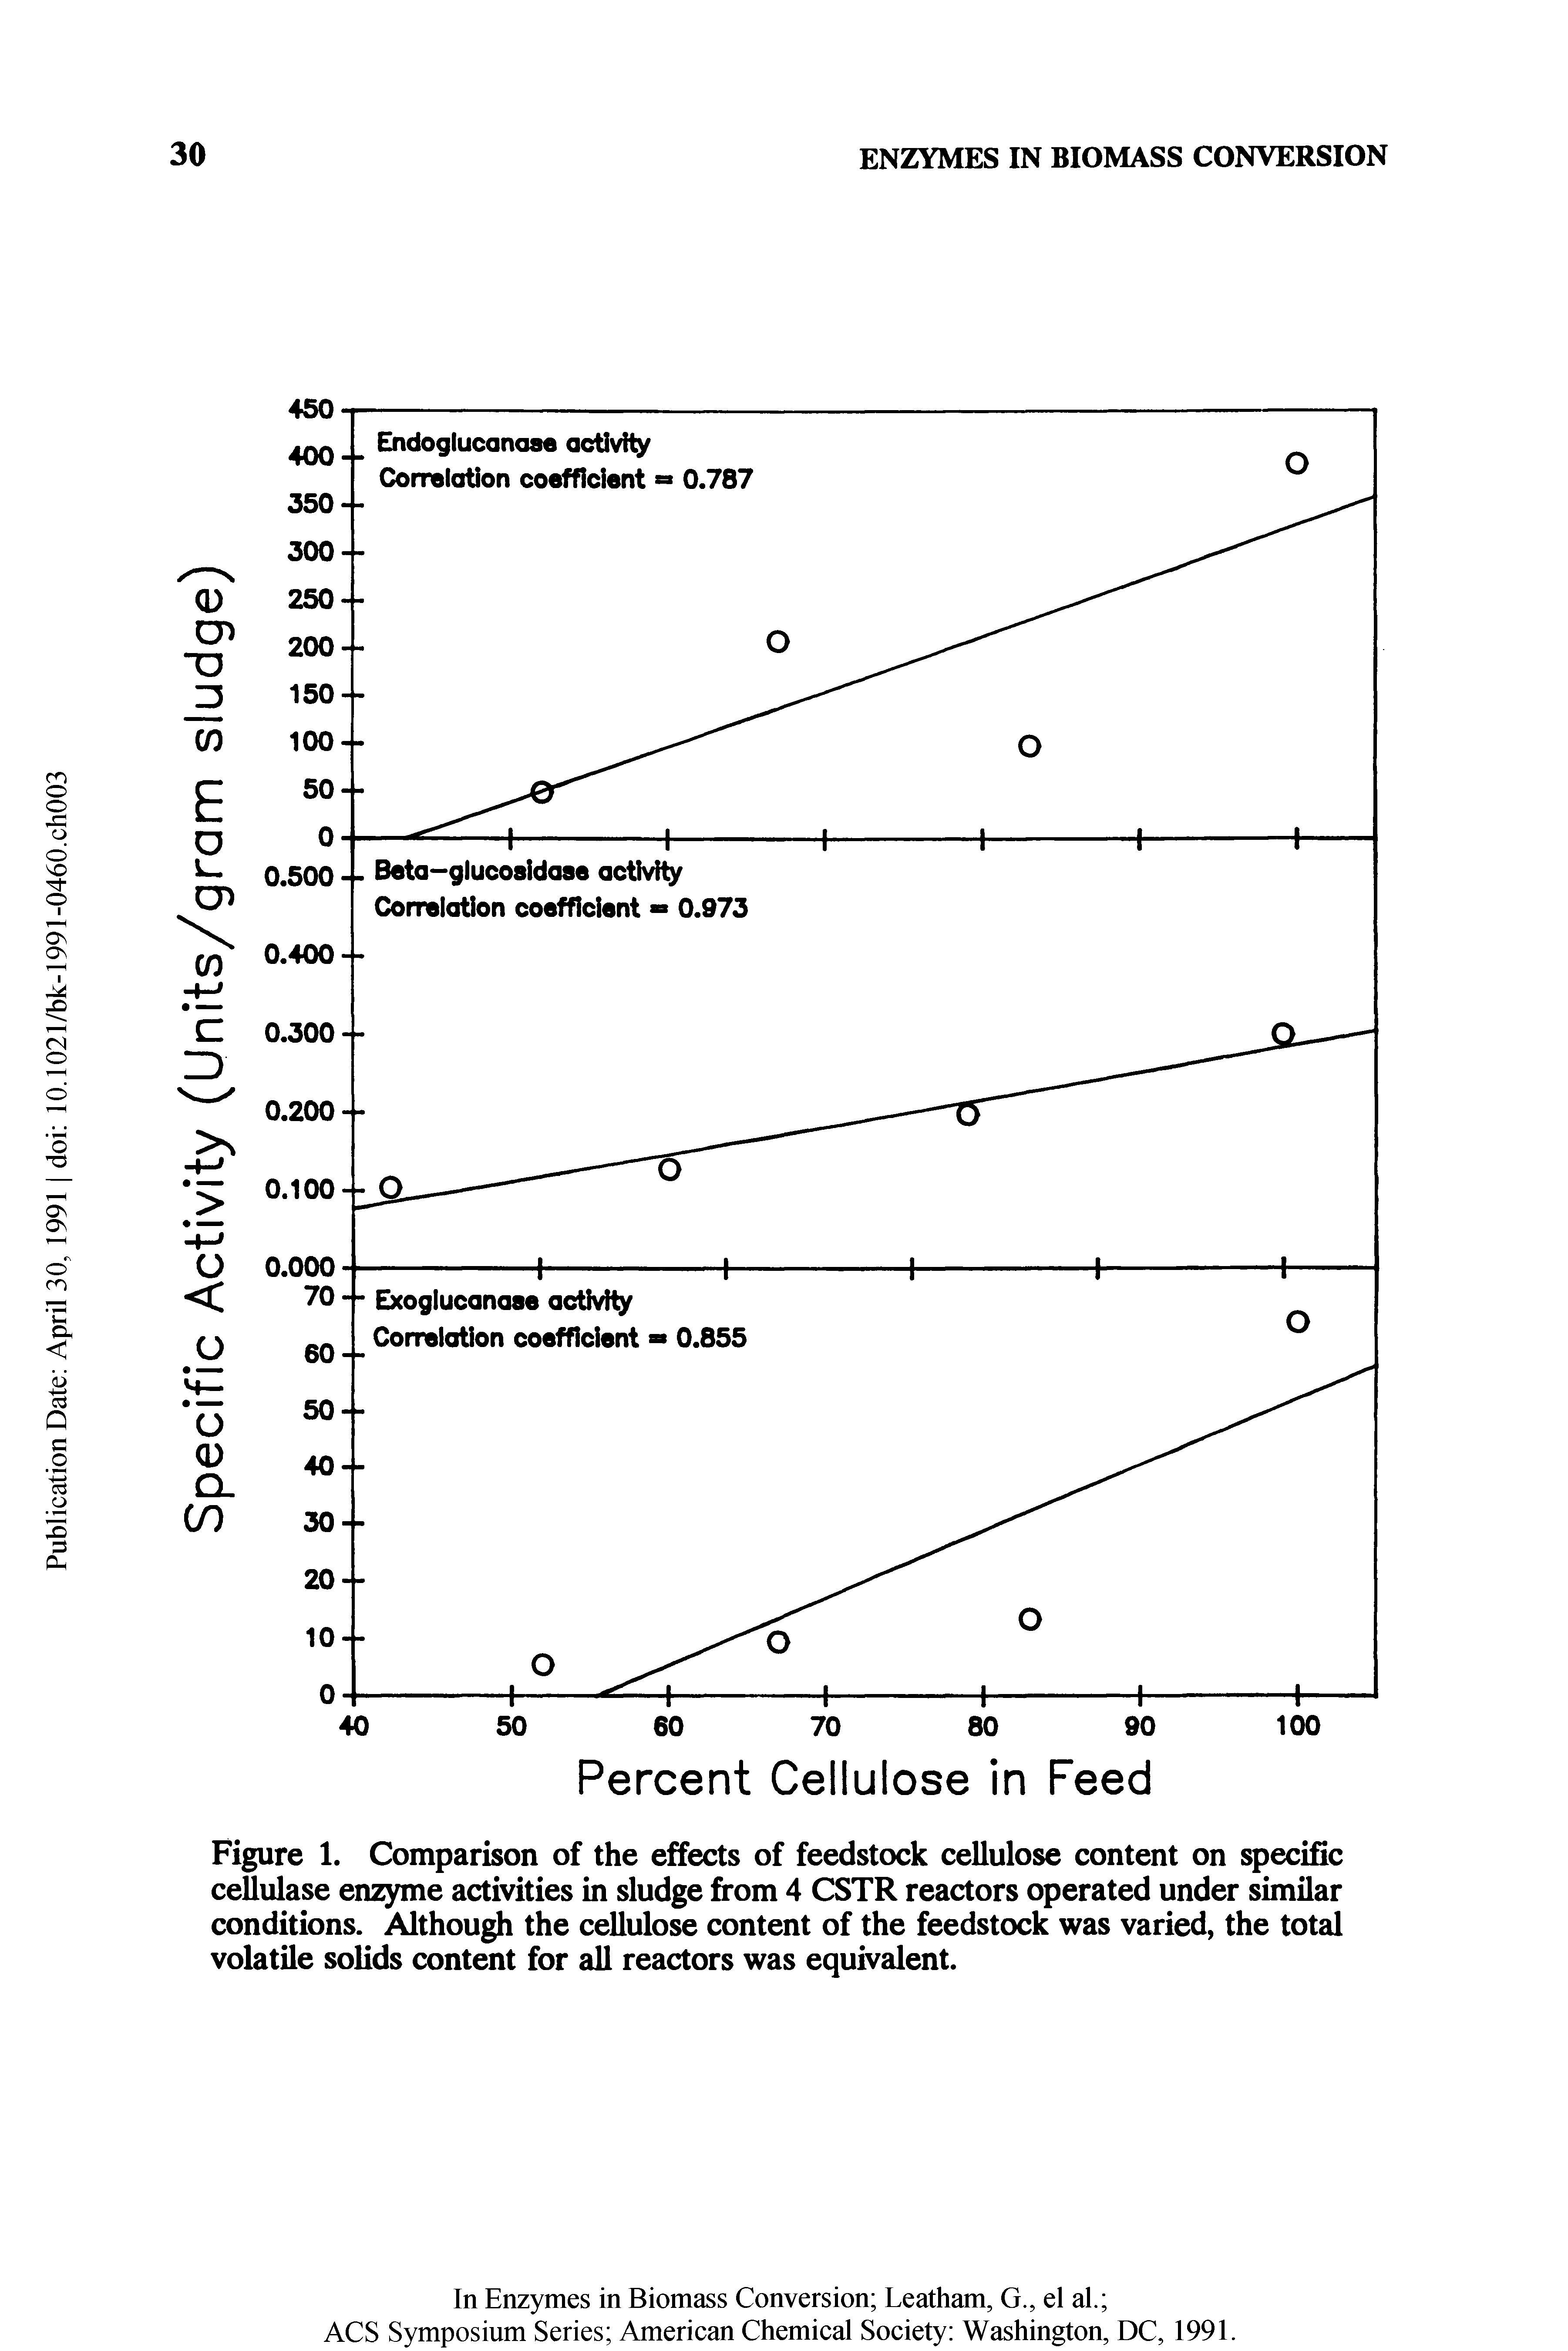 Figure 1. Comparison of the effects of feedstock cellulose content on specific ceUulase enzyme activities in sludge from 4 CSTR reactors operated under similar conditions. Although the cellulose content of the feedstock was varied, the total volatile solids content for all reactors was equivalent.